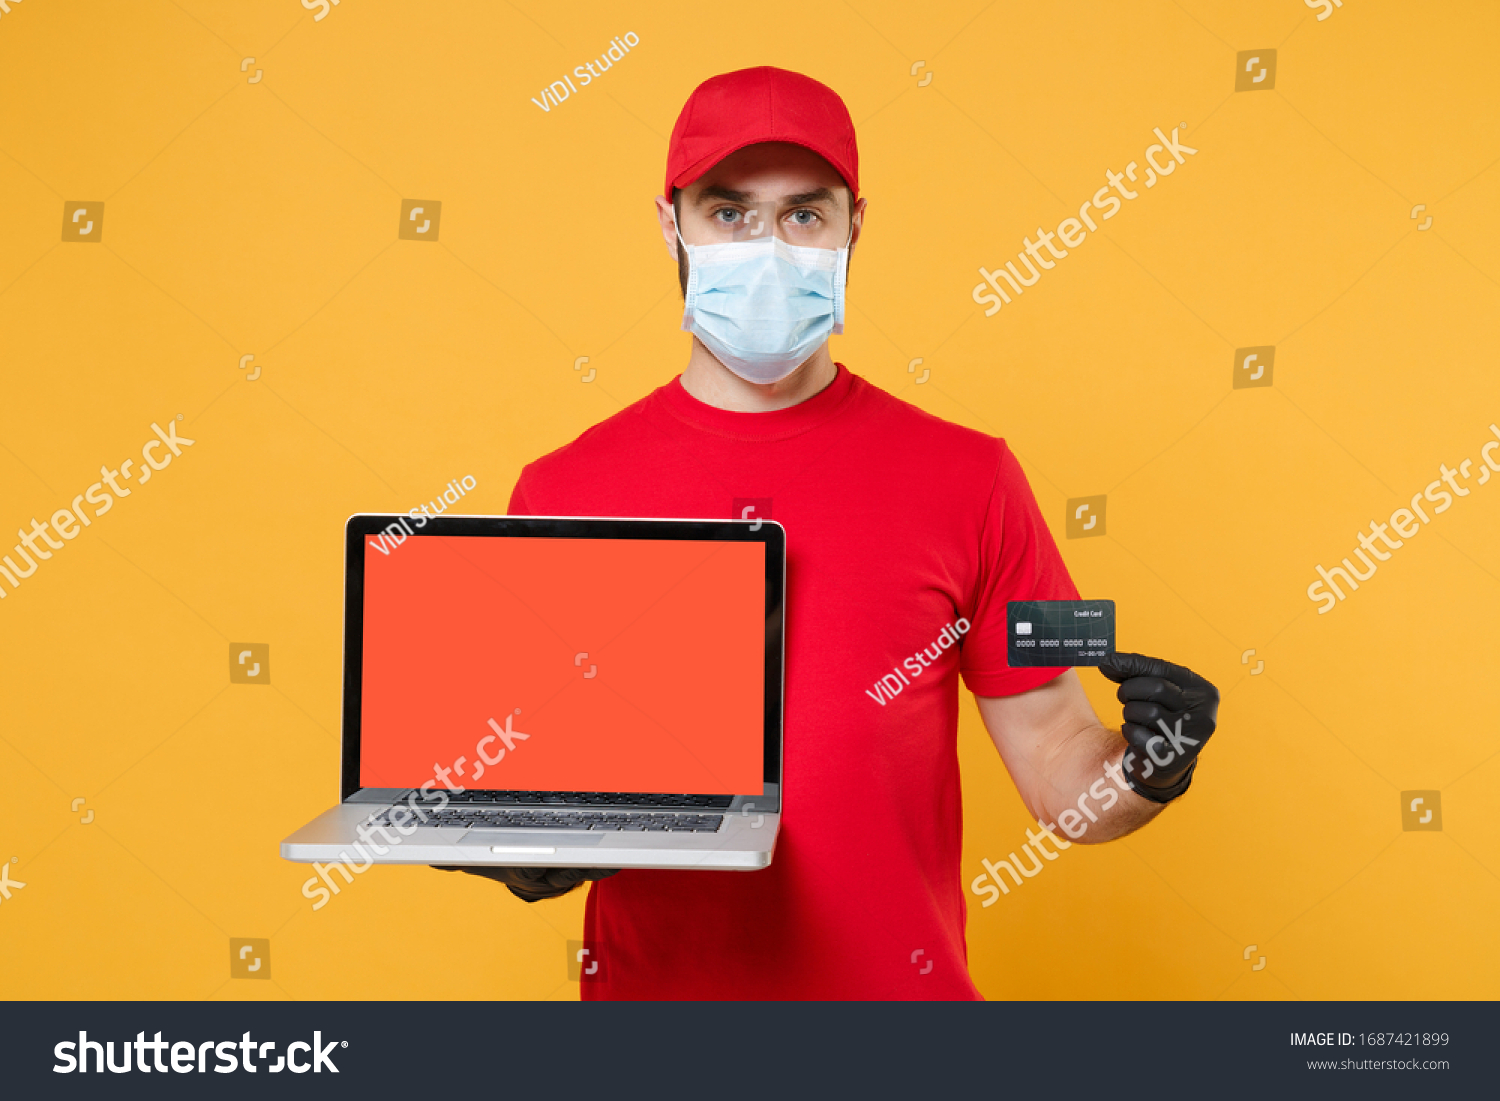 Delivery man in red cap blank t-shirt uniform mask gloves isolated on yellow background studio Guy employee work hold laptop computer Service quarantine pandemic coronavirus virus 2019-ncov concept #1687421899